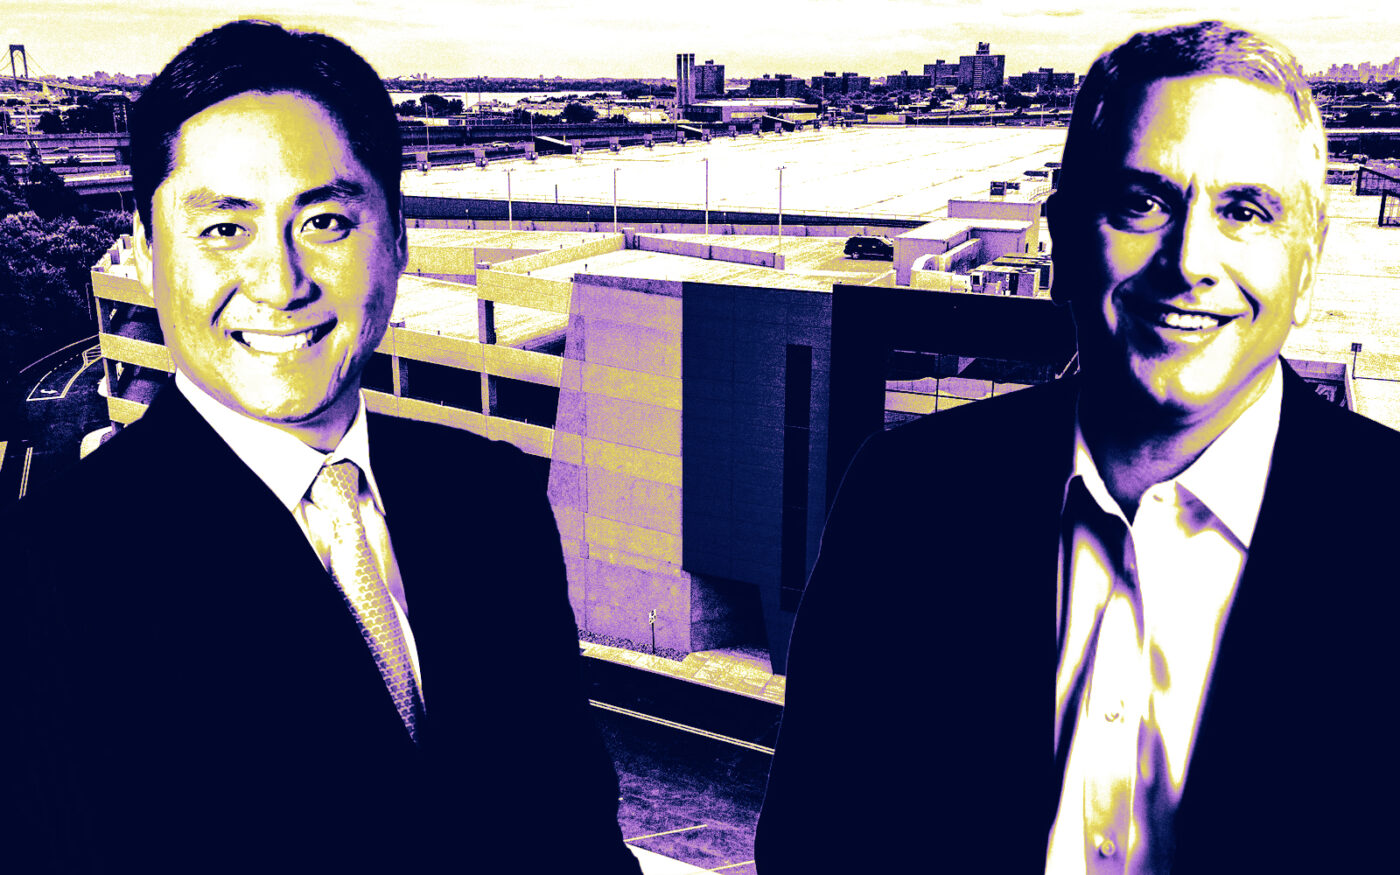 From left: Innovo Property Group CEO Andrew Chung and Affinius Capital CEO Len O’Donnell in front of 2505 Bruckner Boulevard in the Bronx (Getty, Innovo Property Group, Affinius Capital, 2505 Bruckner)